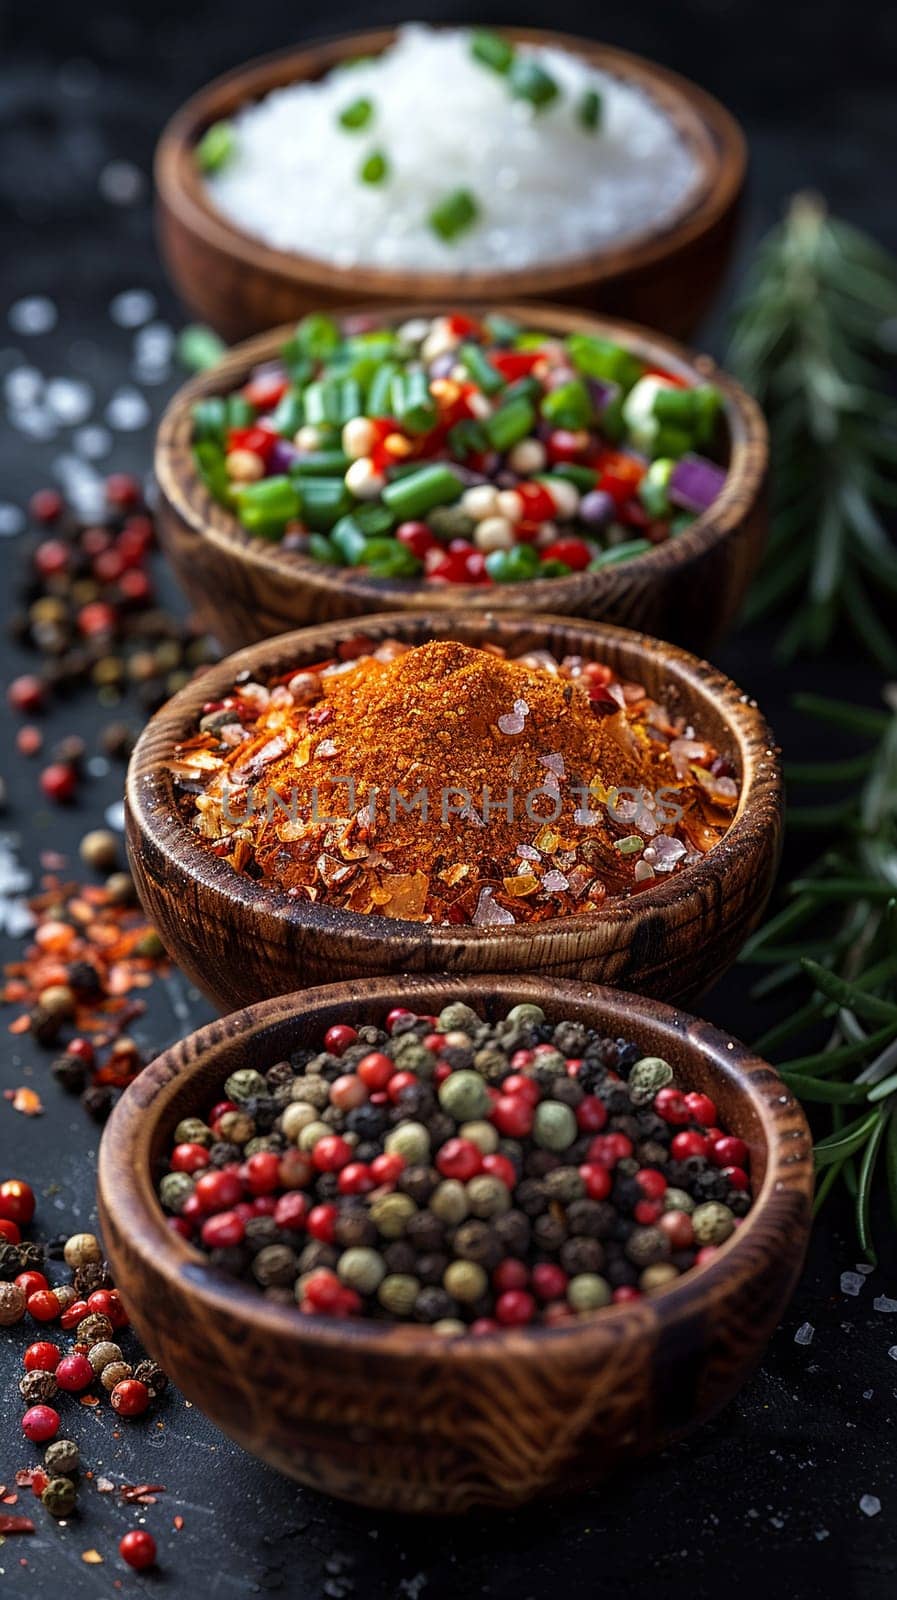 Set of spices and condiments in small bowls, suggesting cooking and flavor.